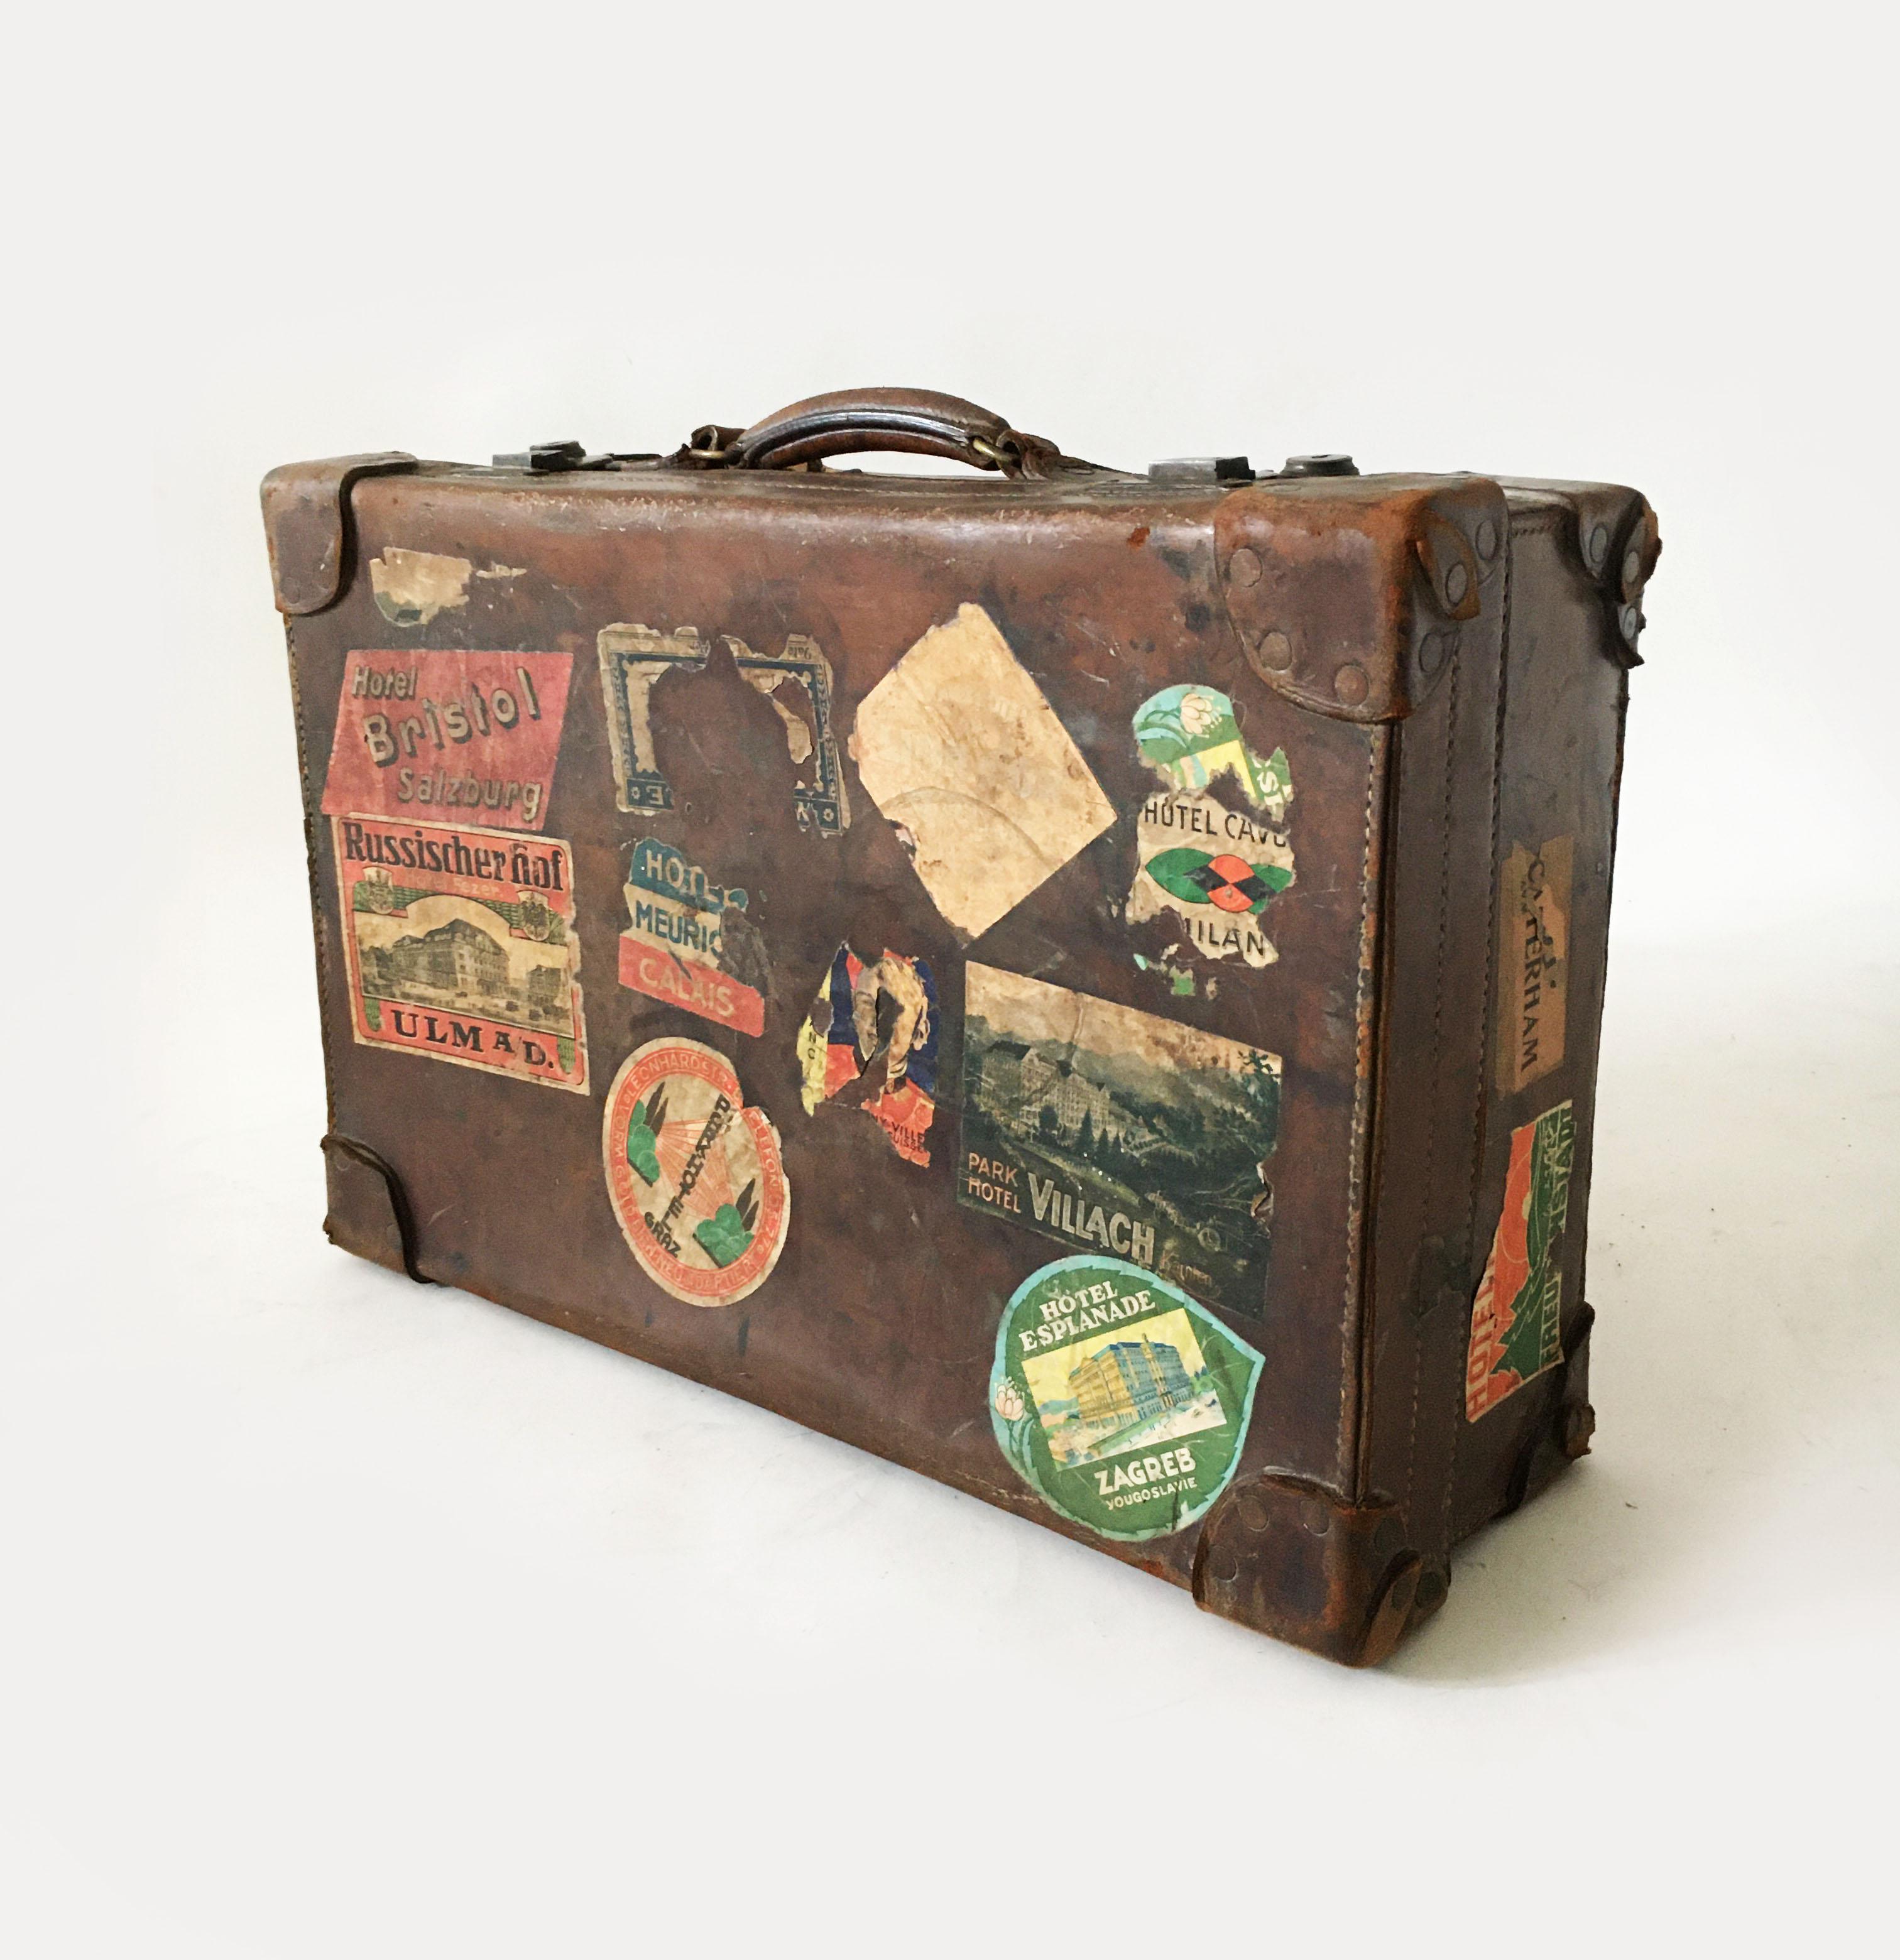 John Pound London leather luggage, England, 1920s. John Pound is the oldest luggage brand in the world. Starting life in the City of London in 1823 making trunks and luggage for the gentry from its base in Leadenhall Street, the brand pre-dates all